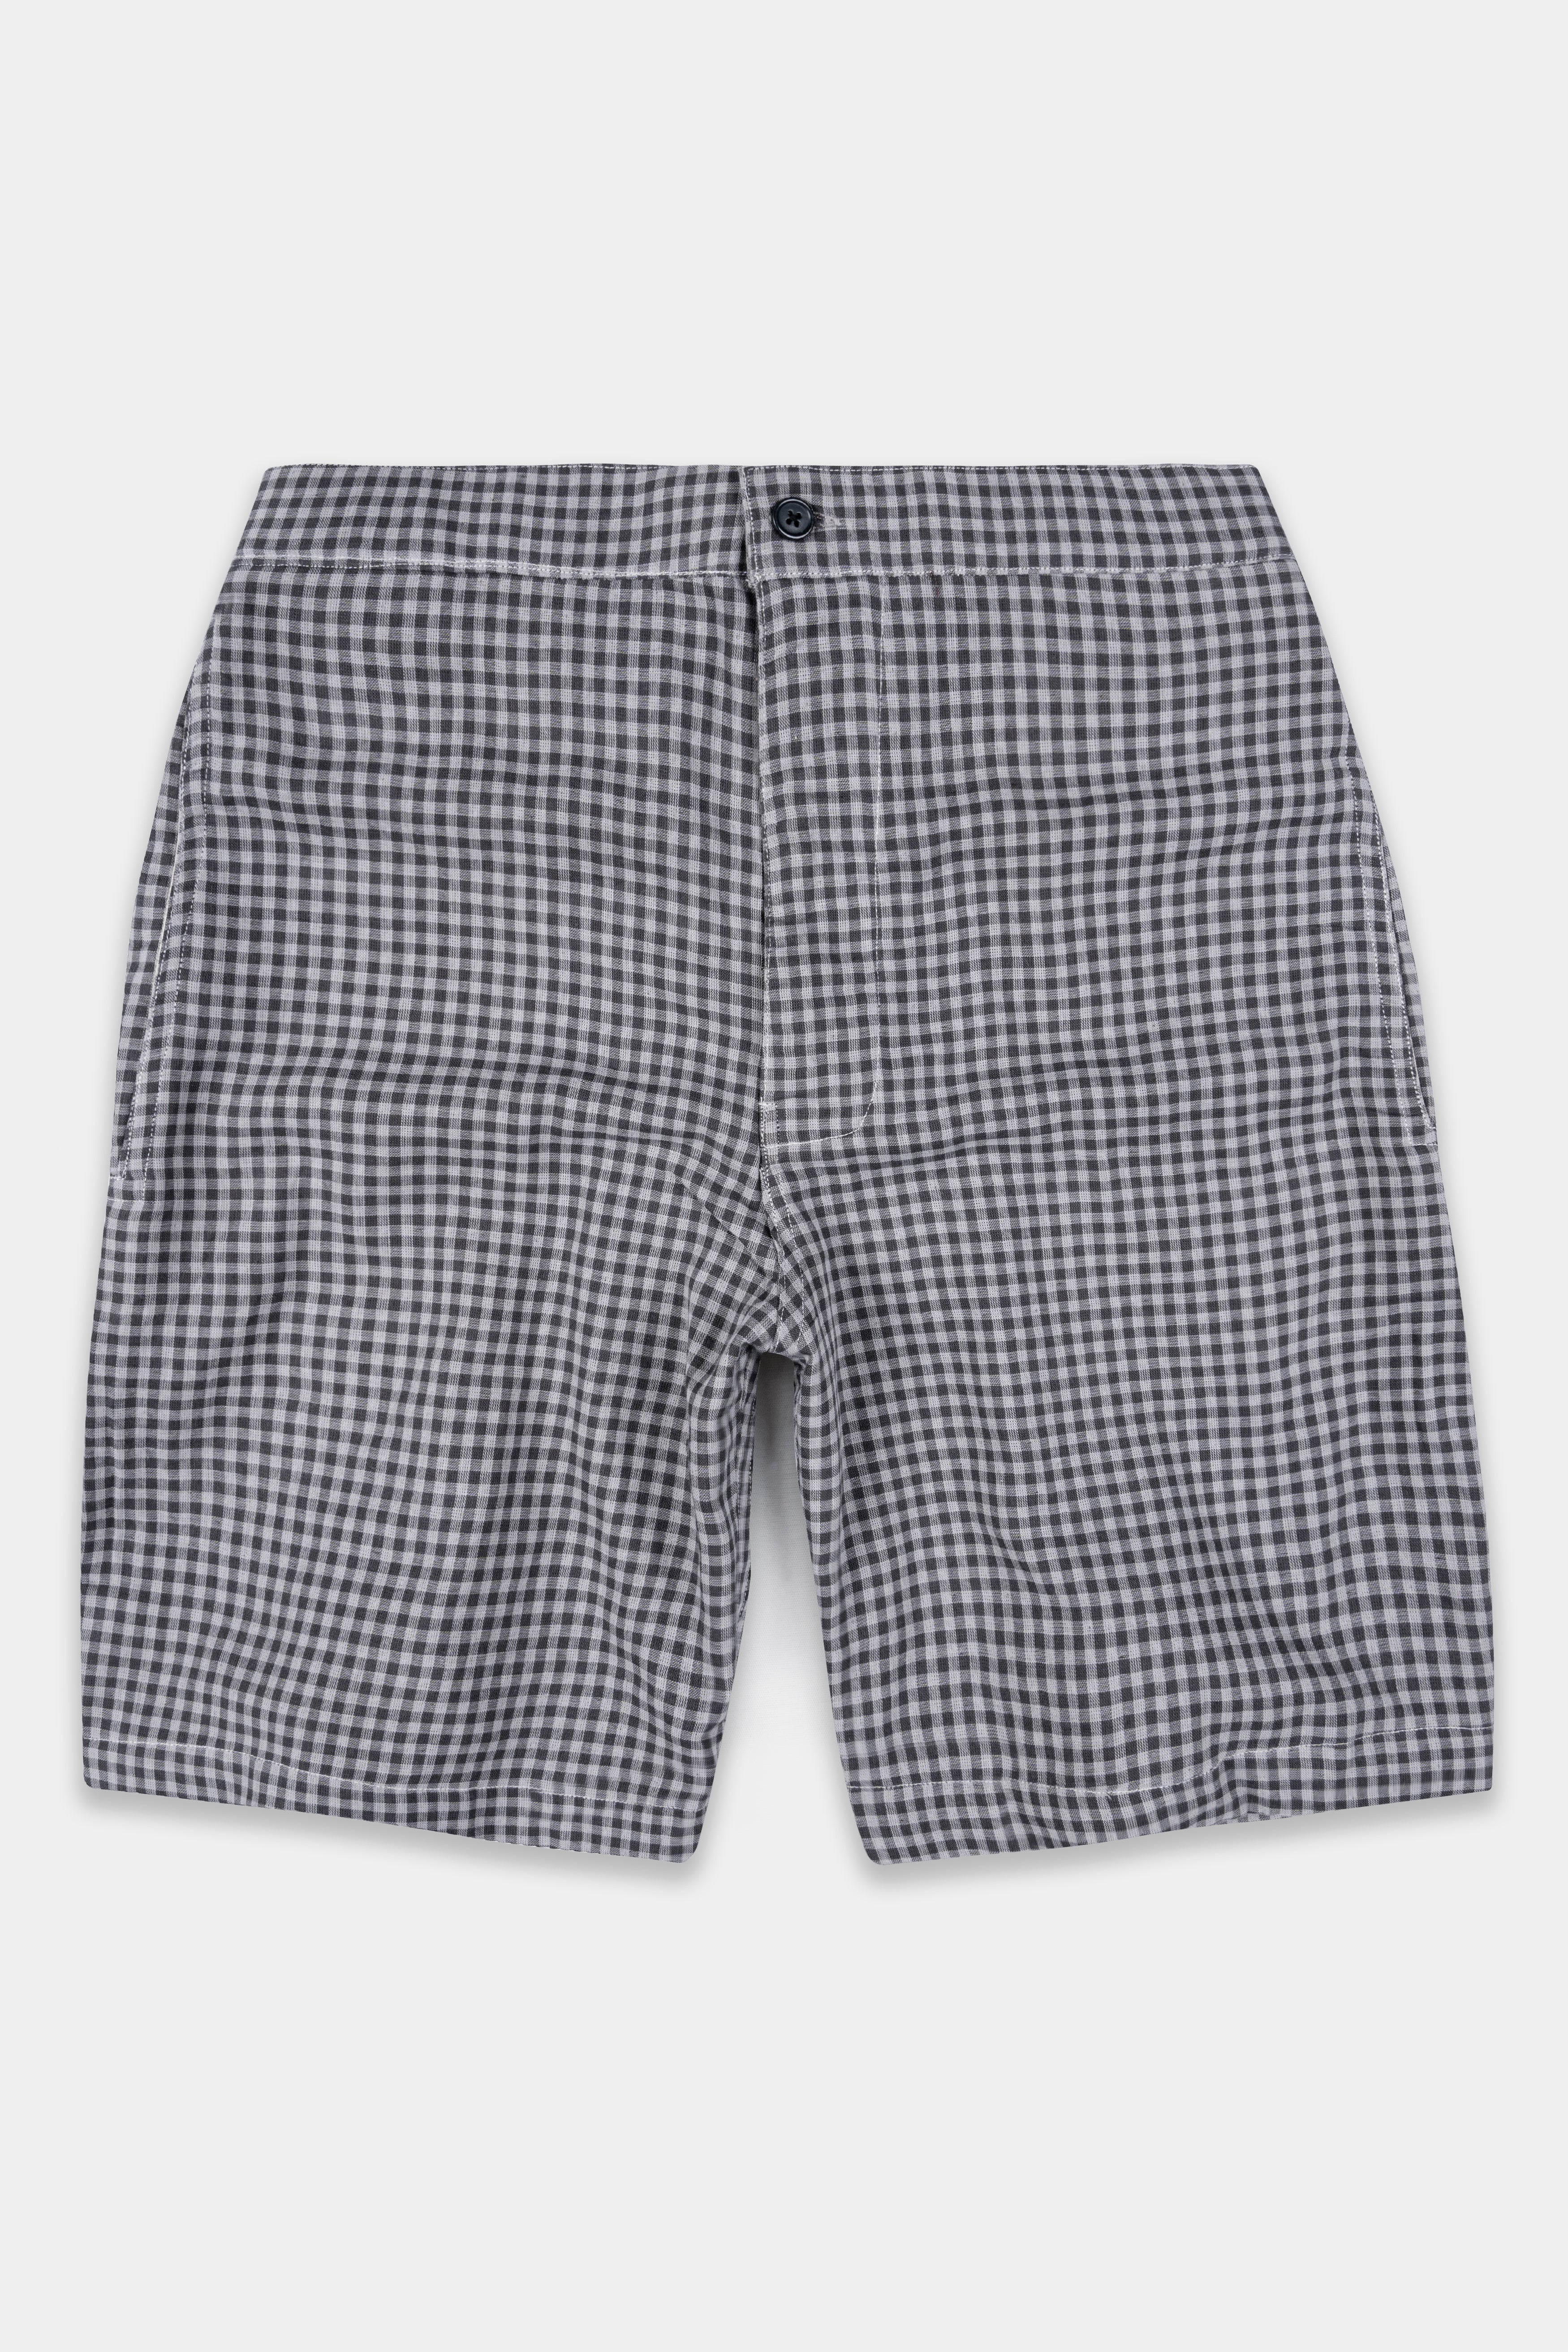 Abbey and Oslo Gray Gingham Checkered Twill Premium Cotton Shorts SR380-28, SR380-30, SR380-32, SR380-34, SR380-36, SR380-38, SR380-40, SR380-42, SR380-44